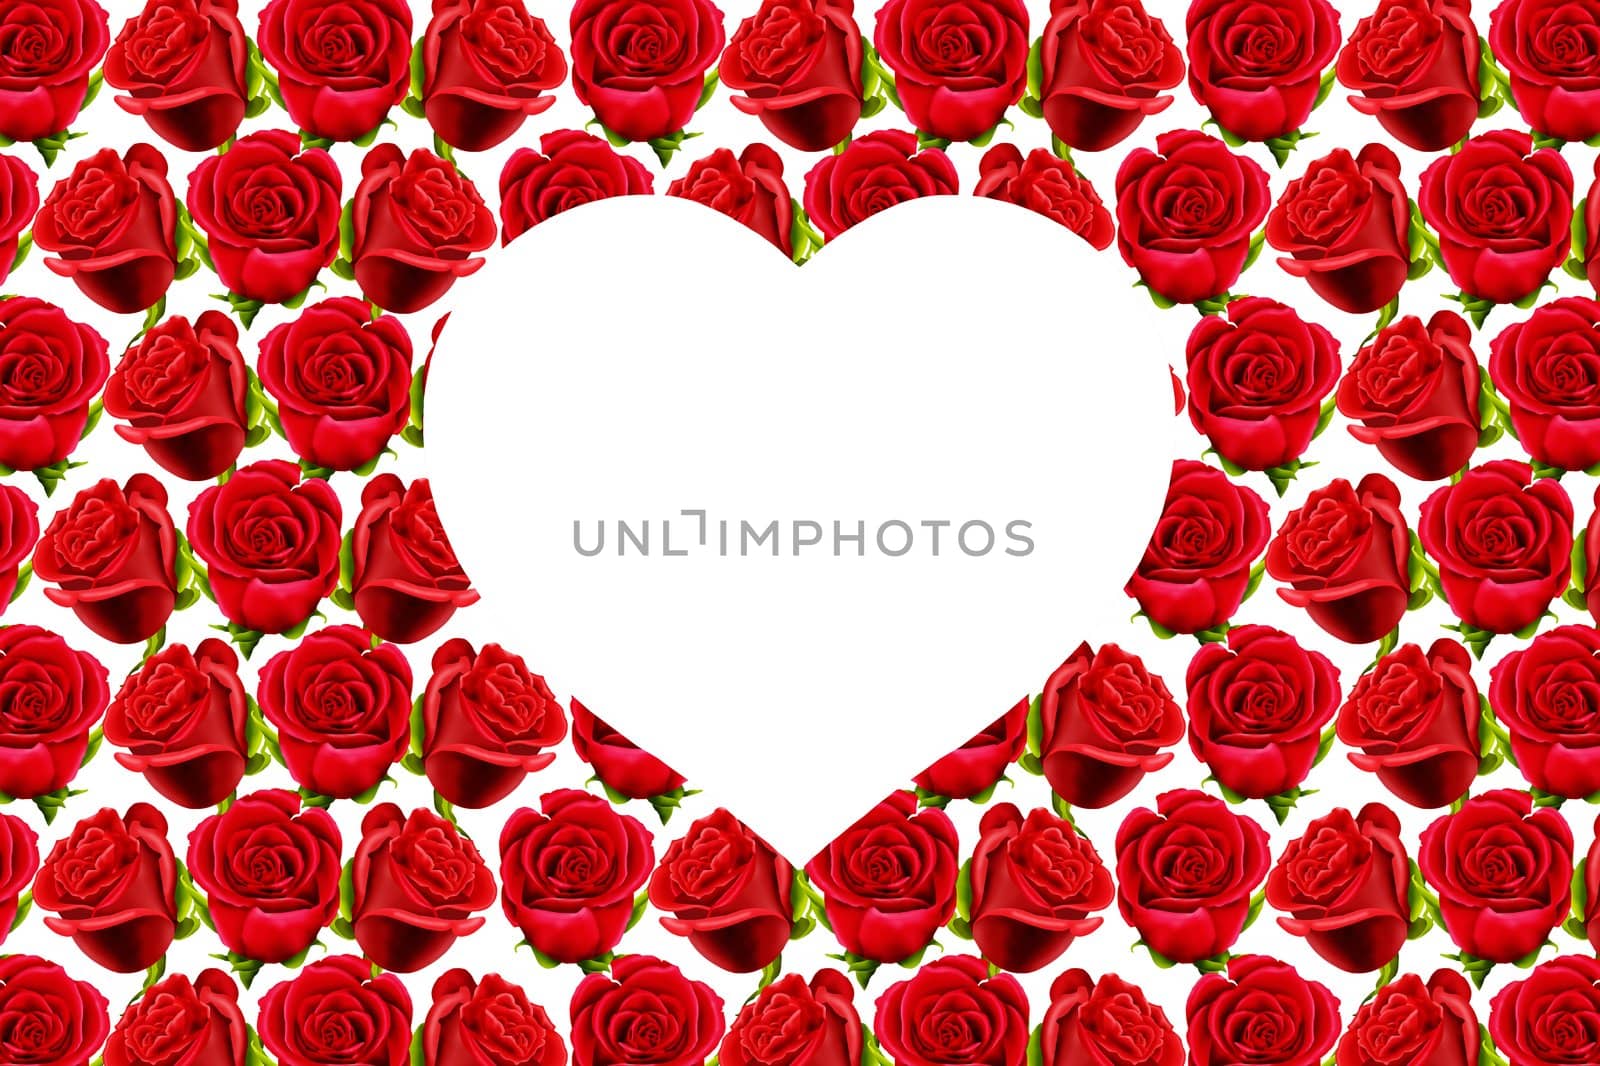 Wallpaper of red roses with a white heart by acremead